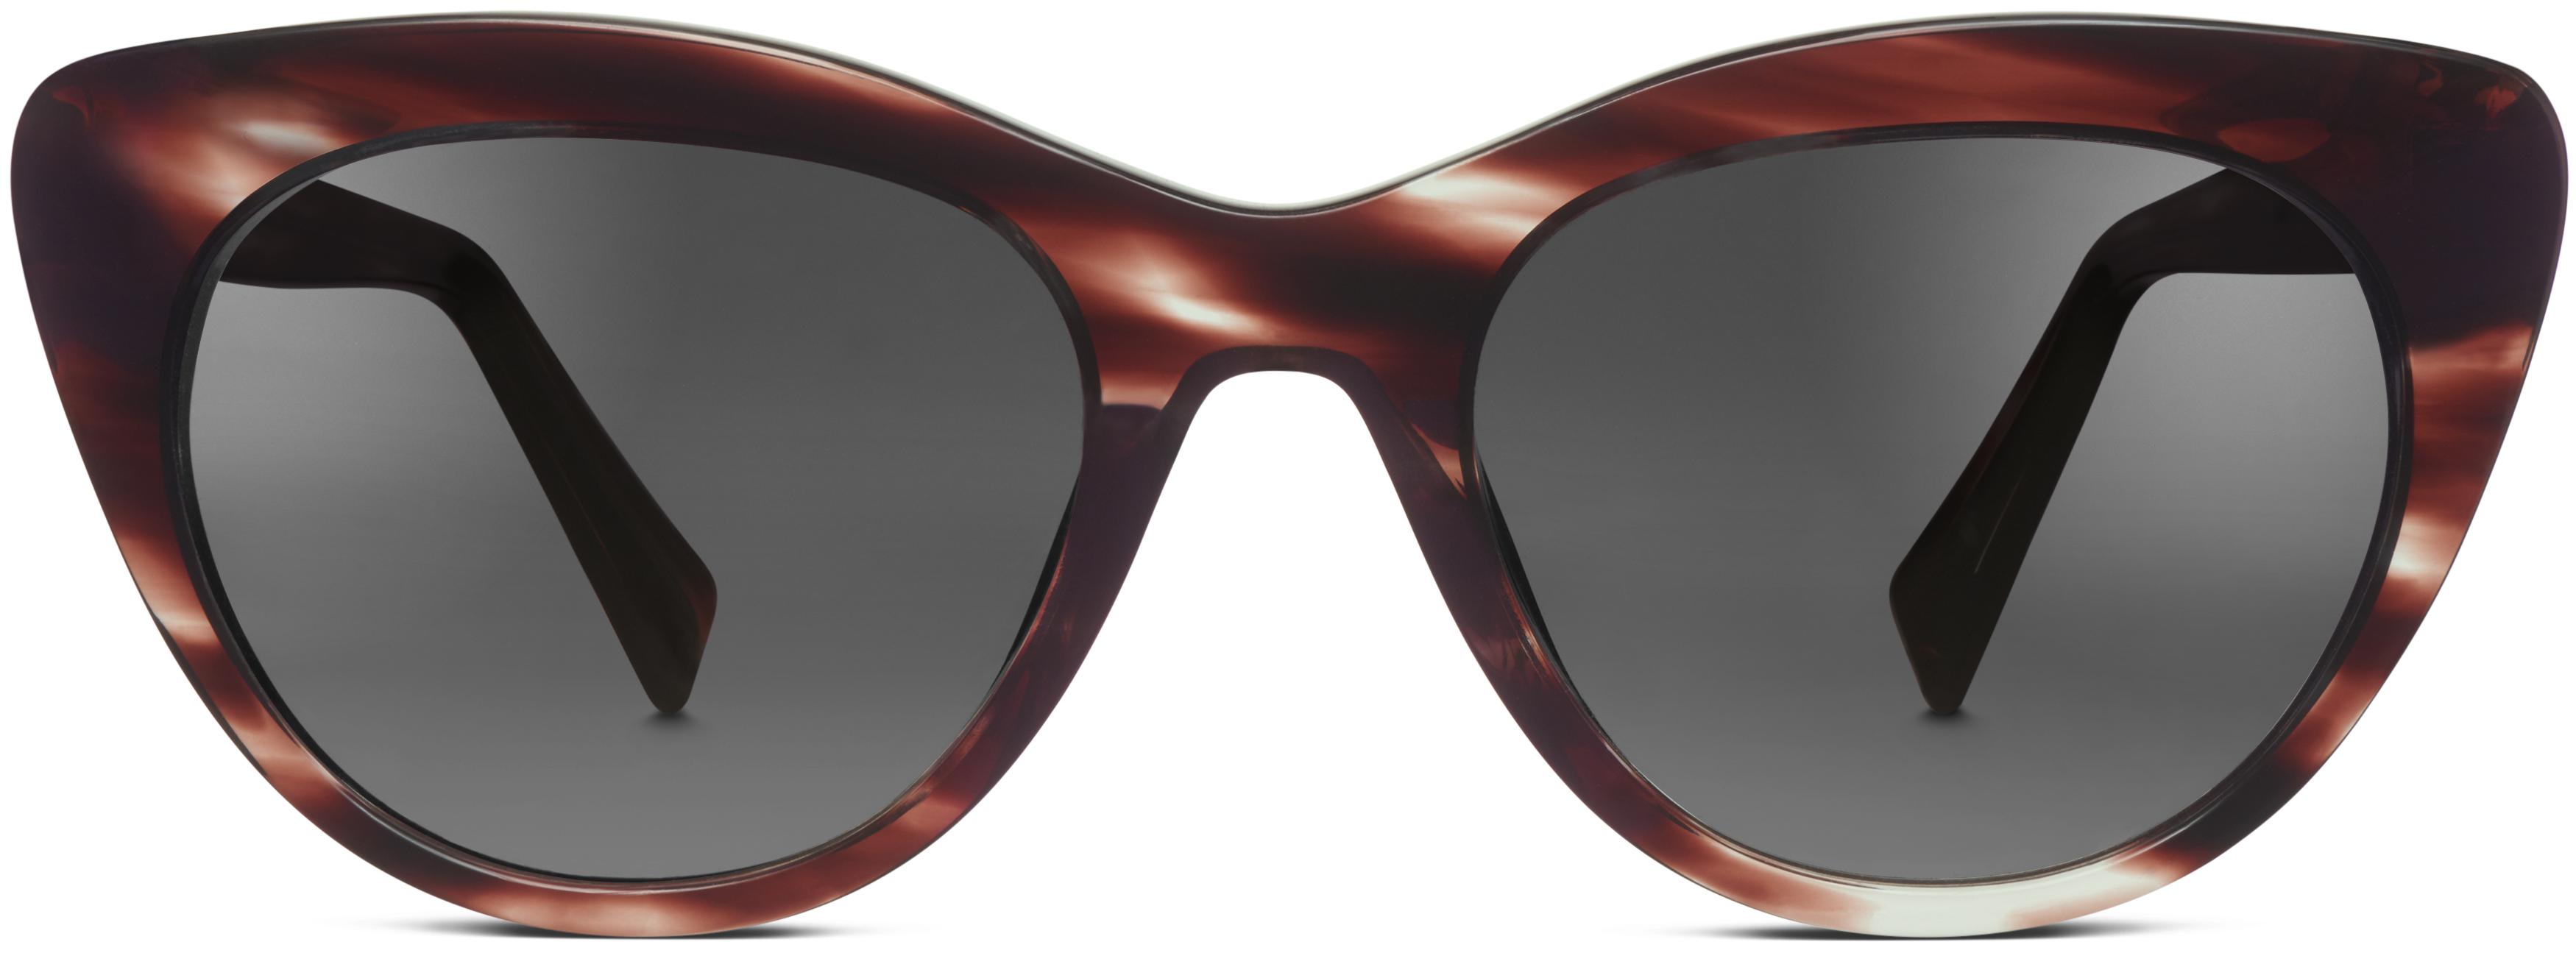 Tilley Sunglasses in Amaretto | Warby Parker